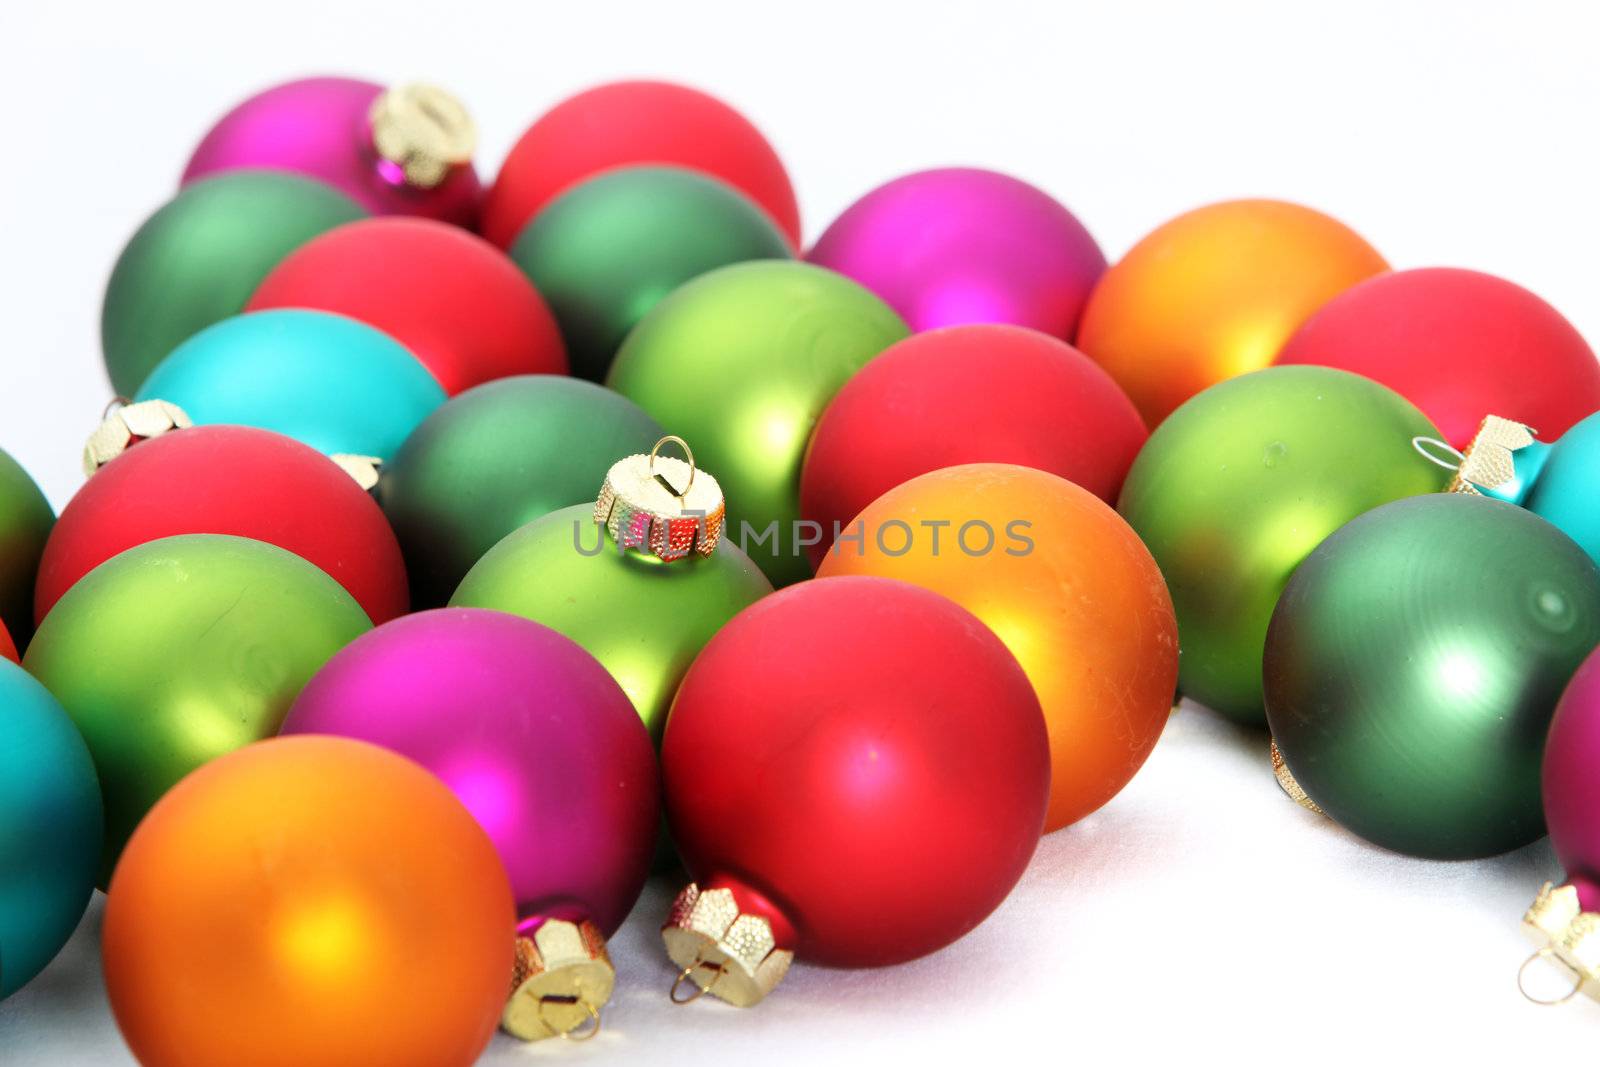 Colorful Christmas traditional globes by Farina6000